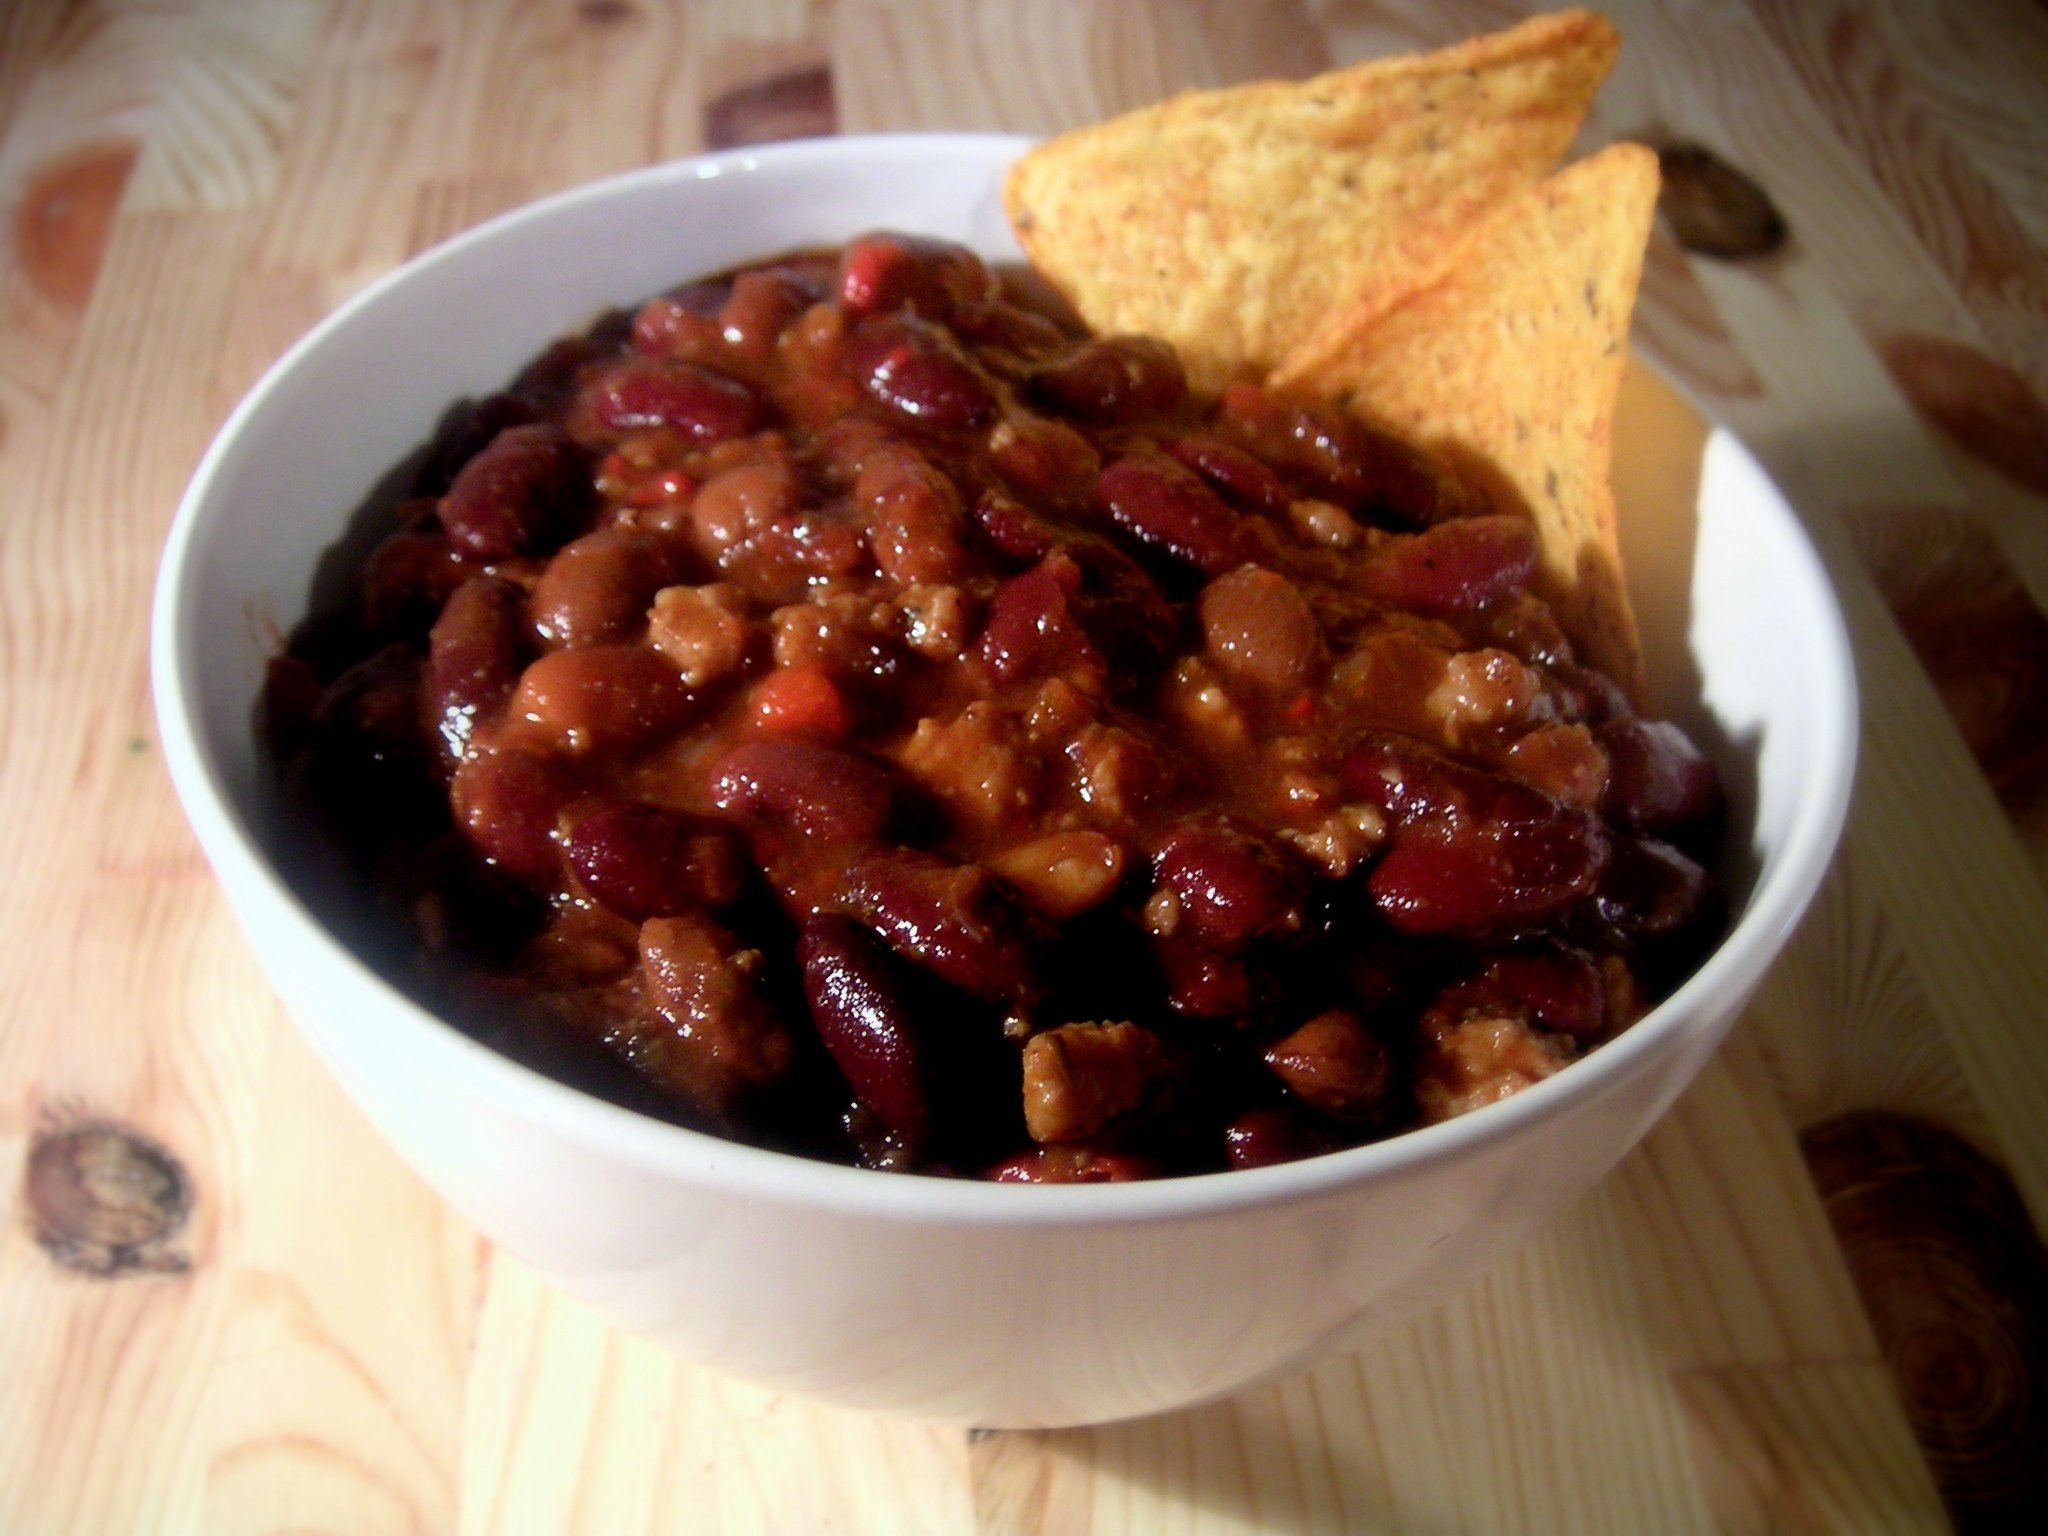 The last Thursday in February is National Chili Day.  Will you celebrate?